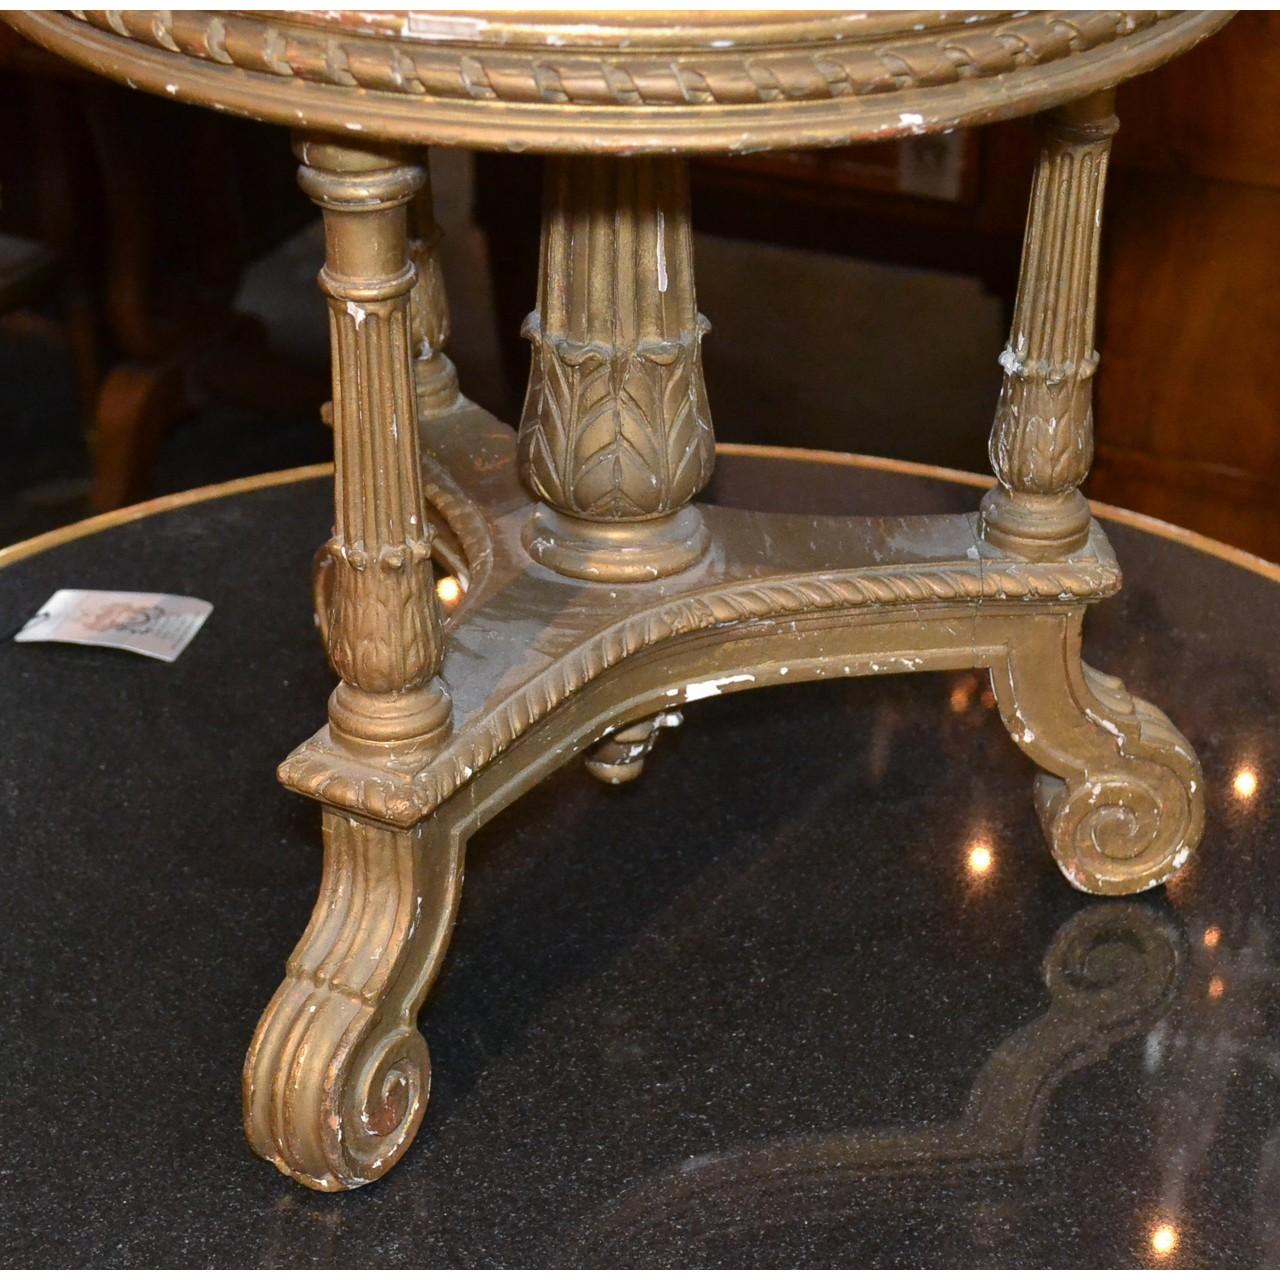 19th century French giltwood circular stool with an Asian motif upholstered top. The apron with carved rope trim above fluted columns with acanthus leaf accents. The entire on a tripod base with reverse scrolled feet,

circa 1890.

Would make a